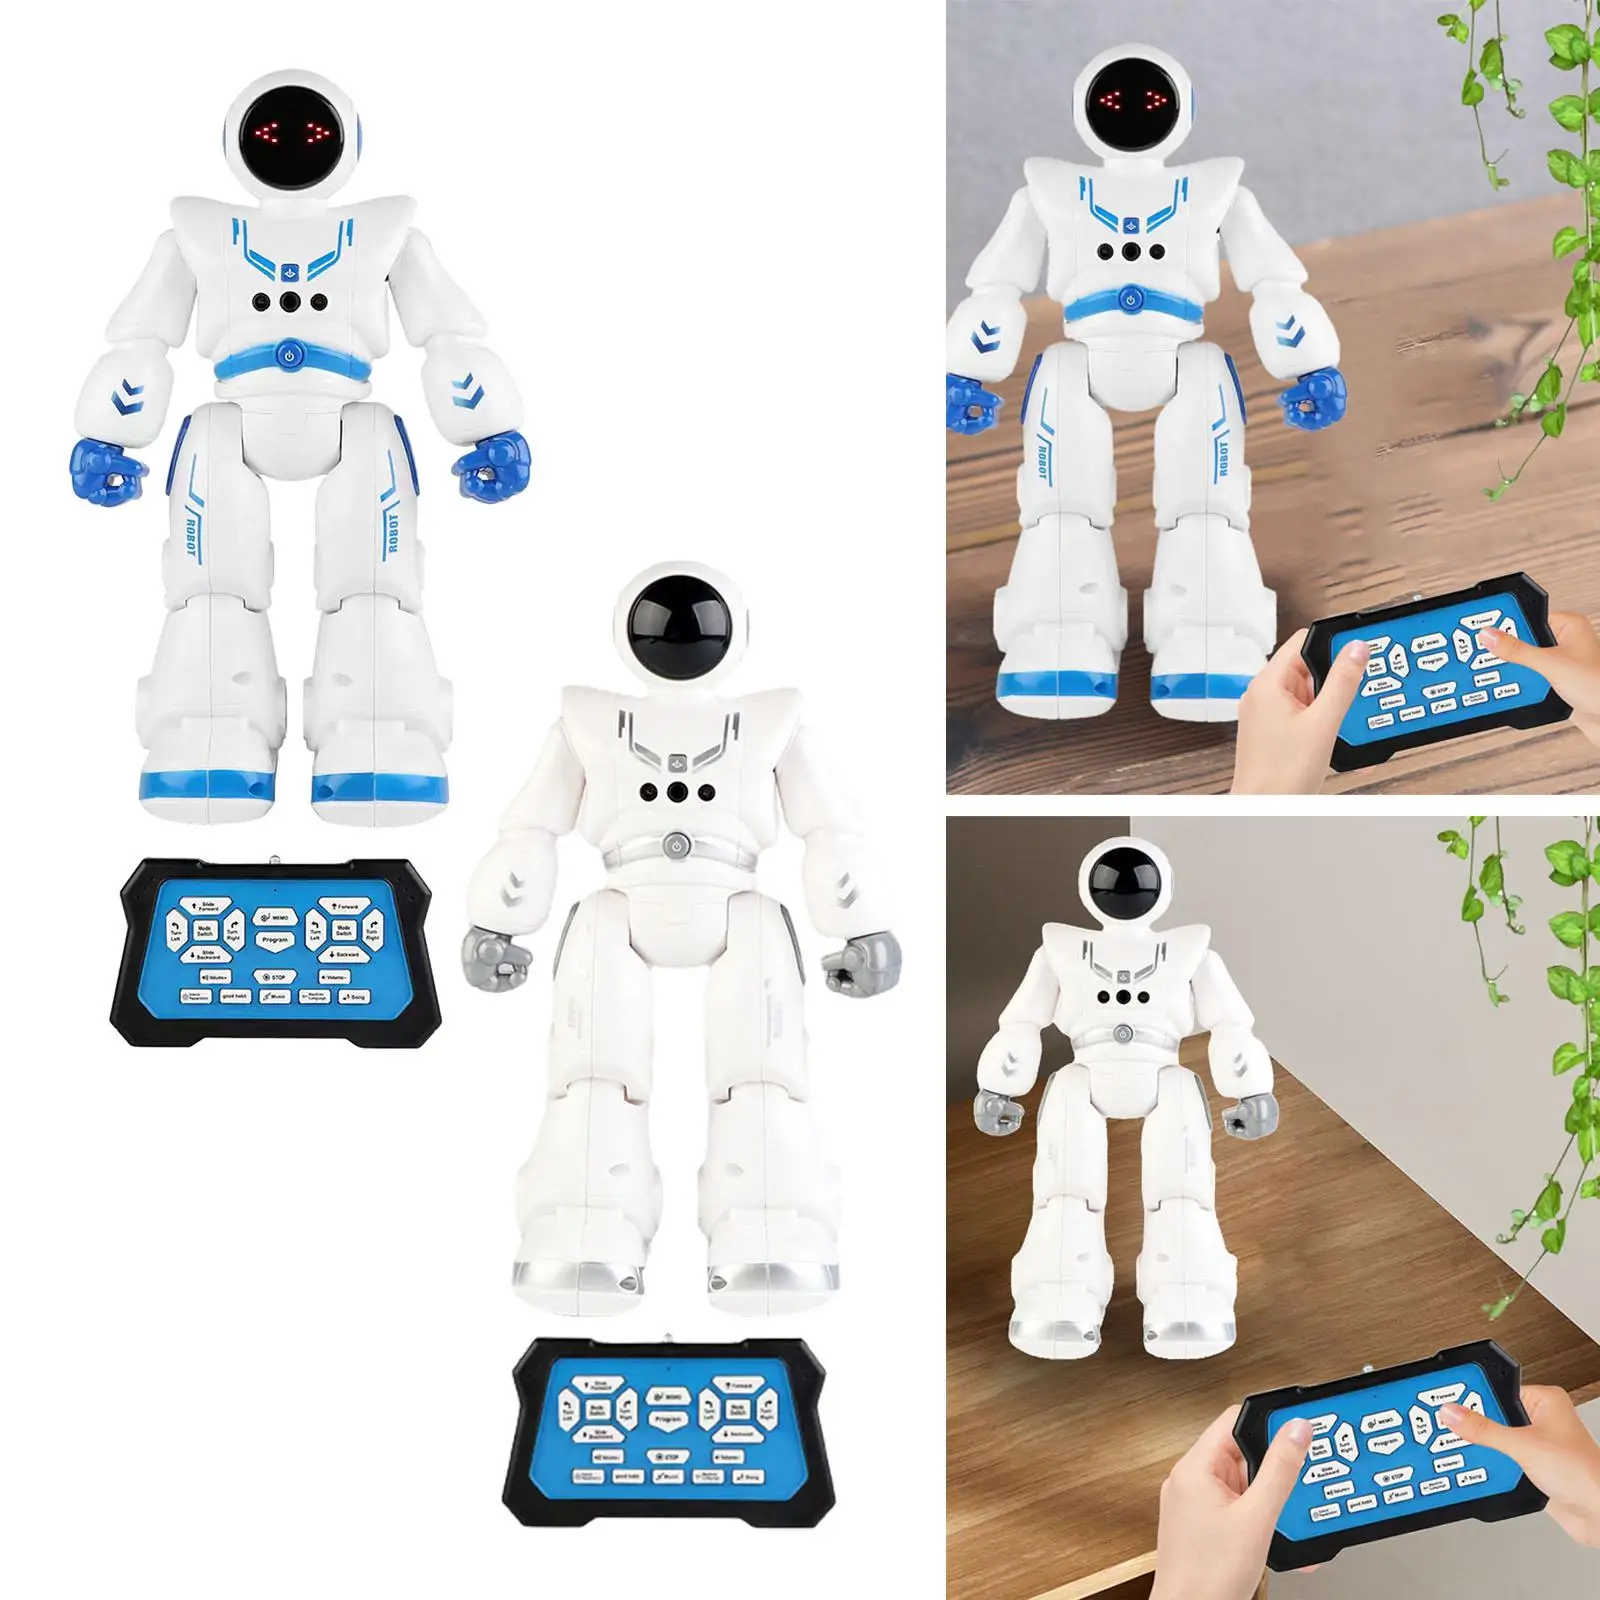 Robot Toys for Kids Educational Toy Funny Early Education Robot for Walking Gift Kids Boys Age 3 4 5 6 7 8 Year Old